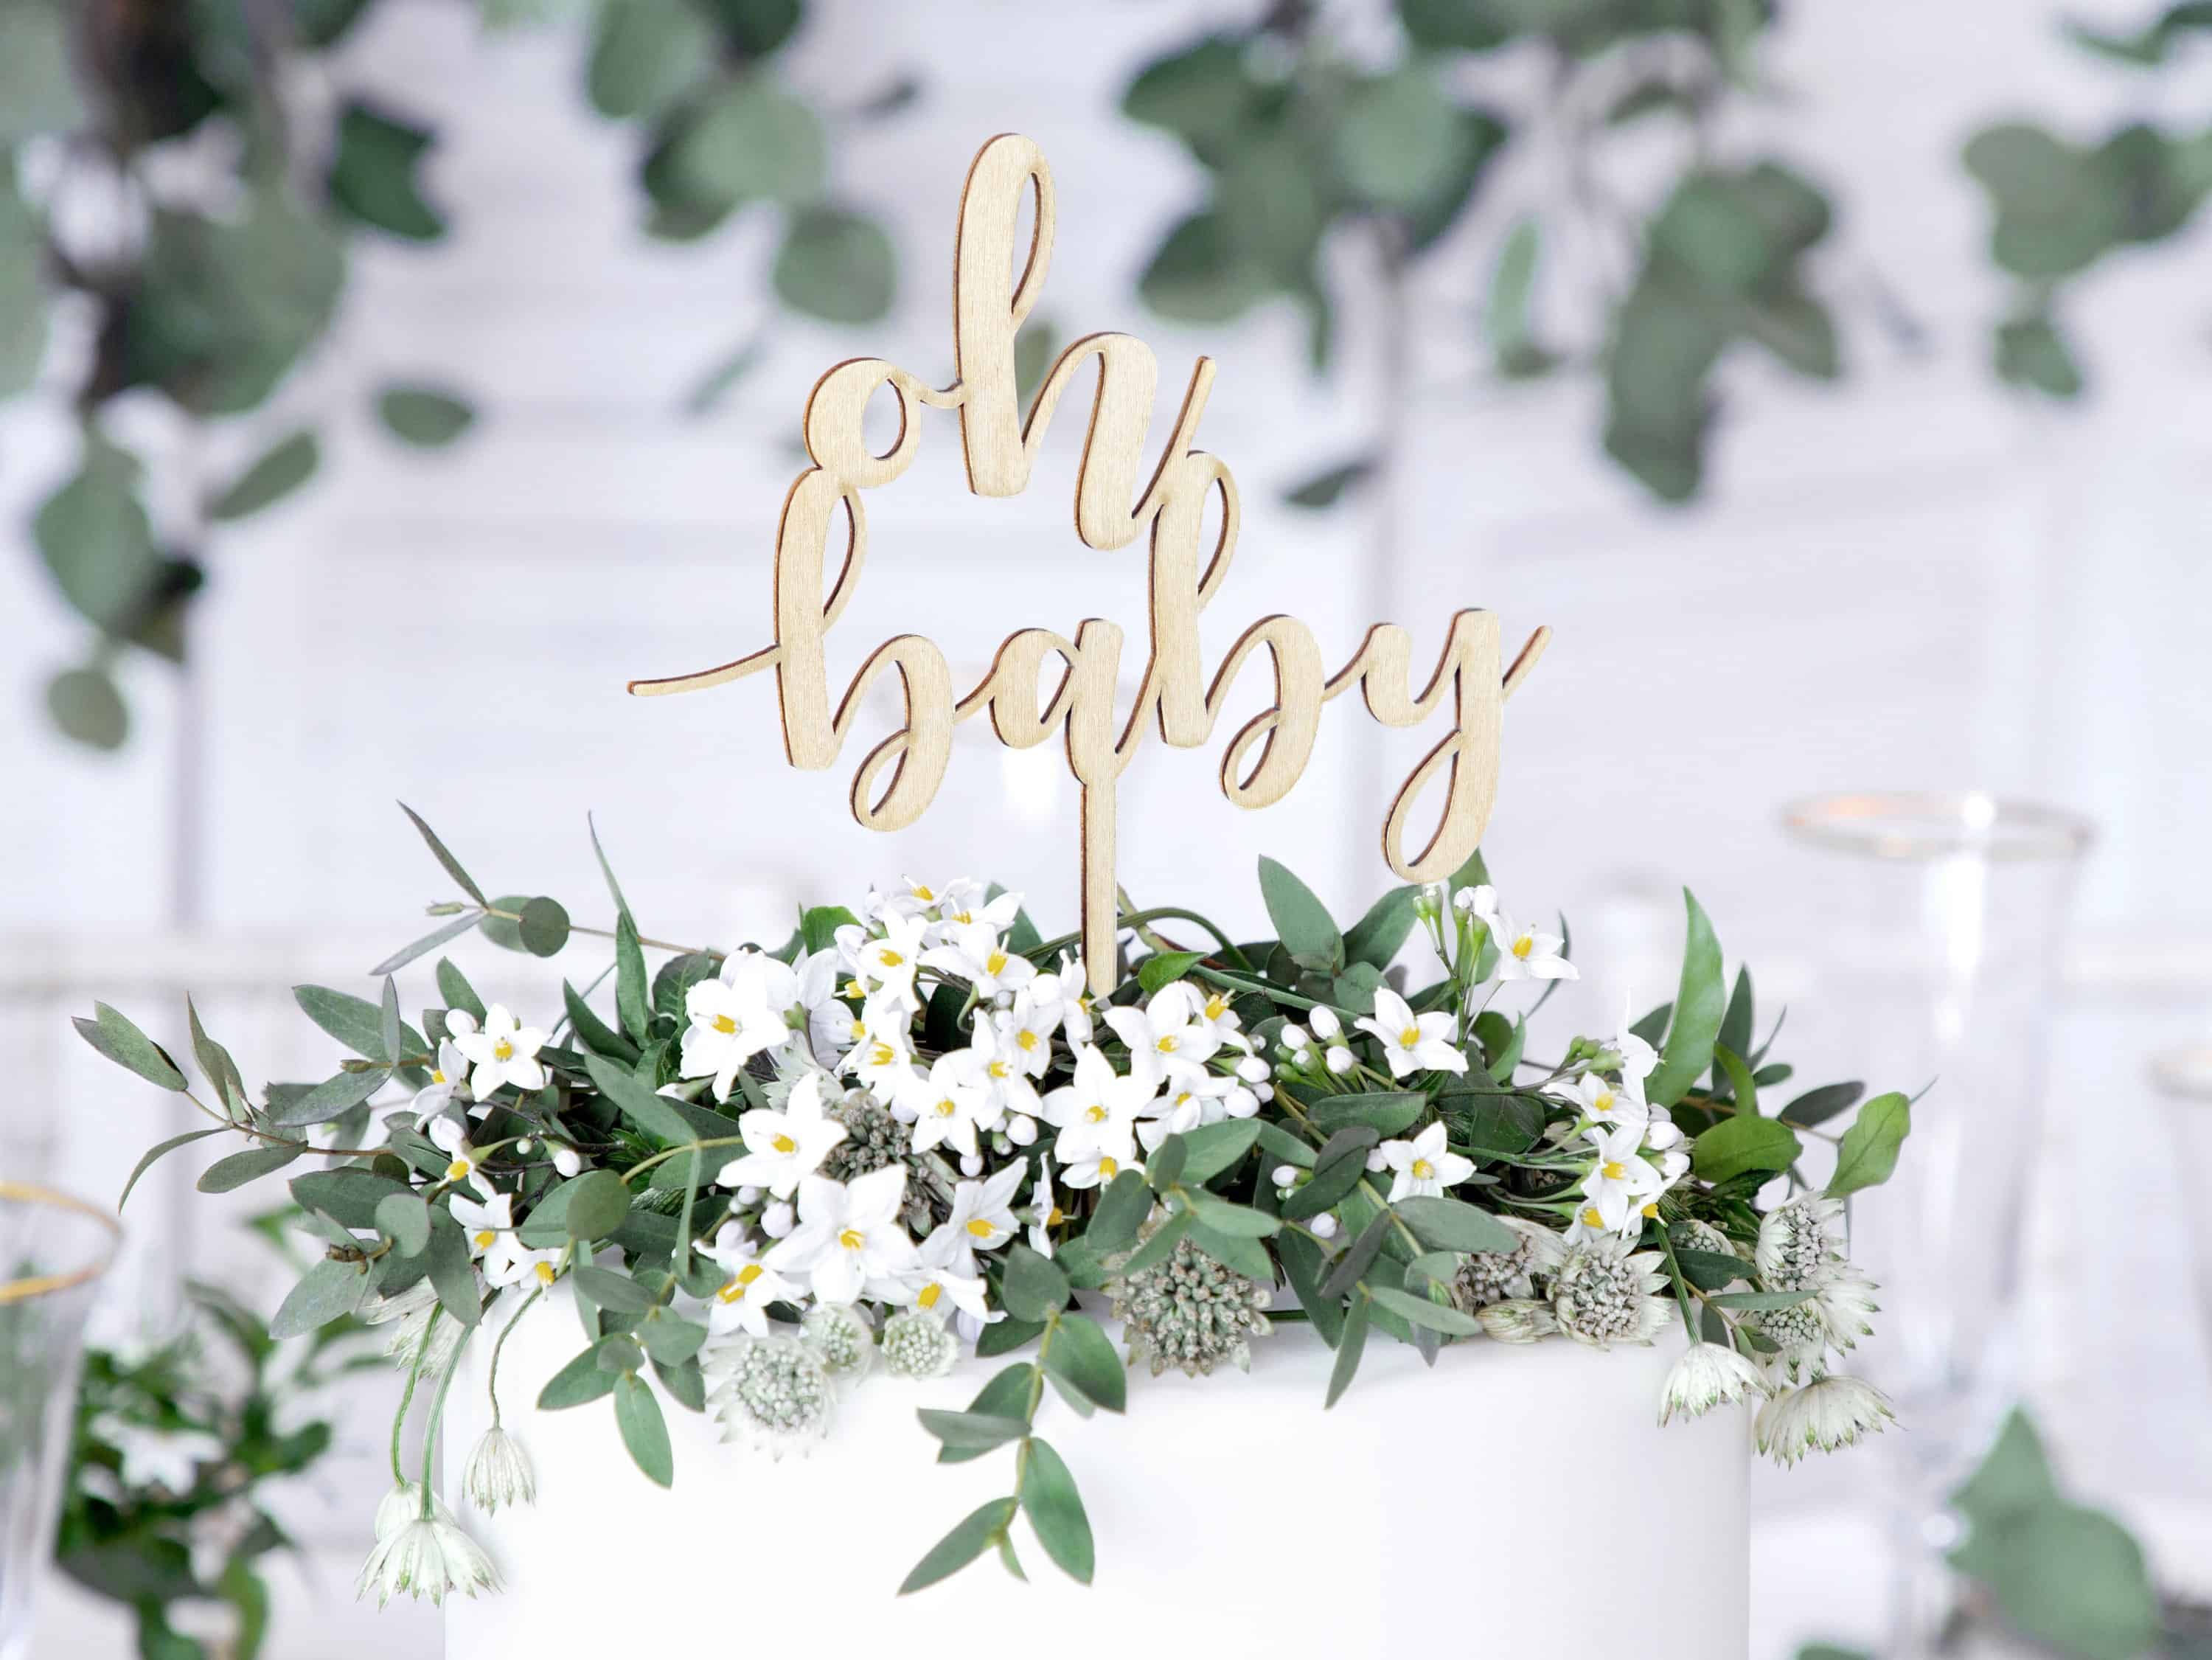 oh baby wooden cake topper